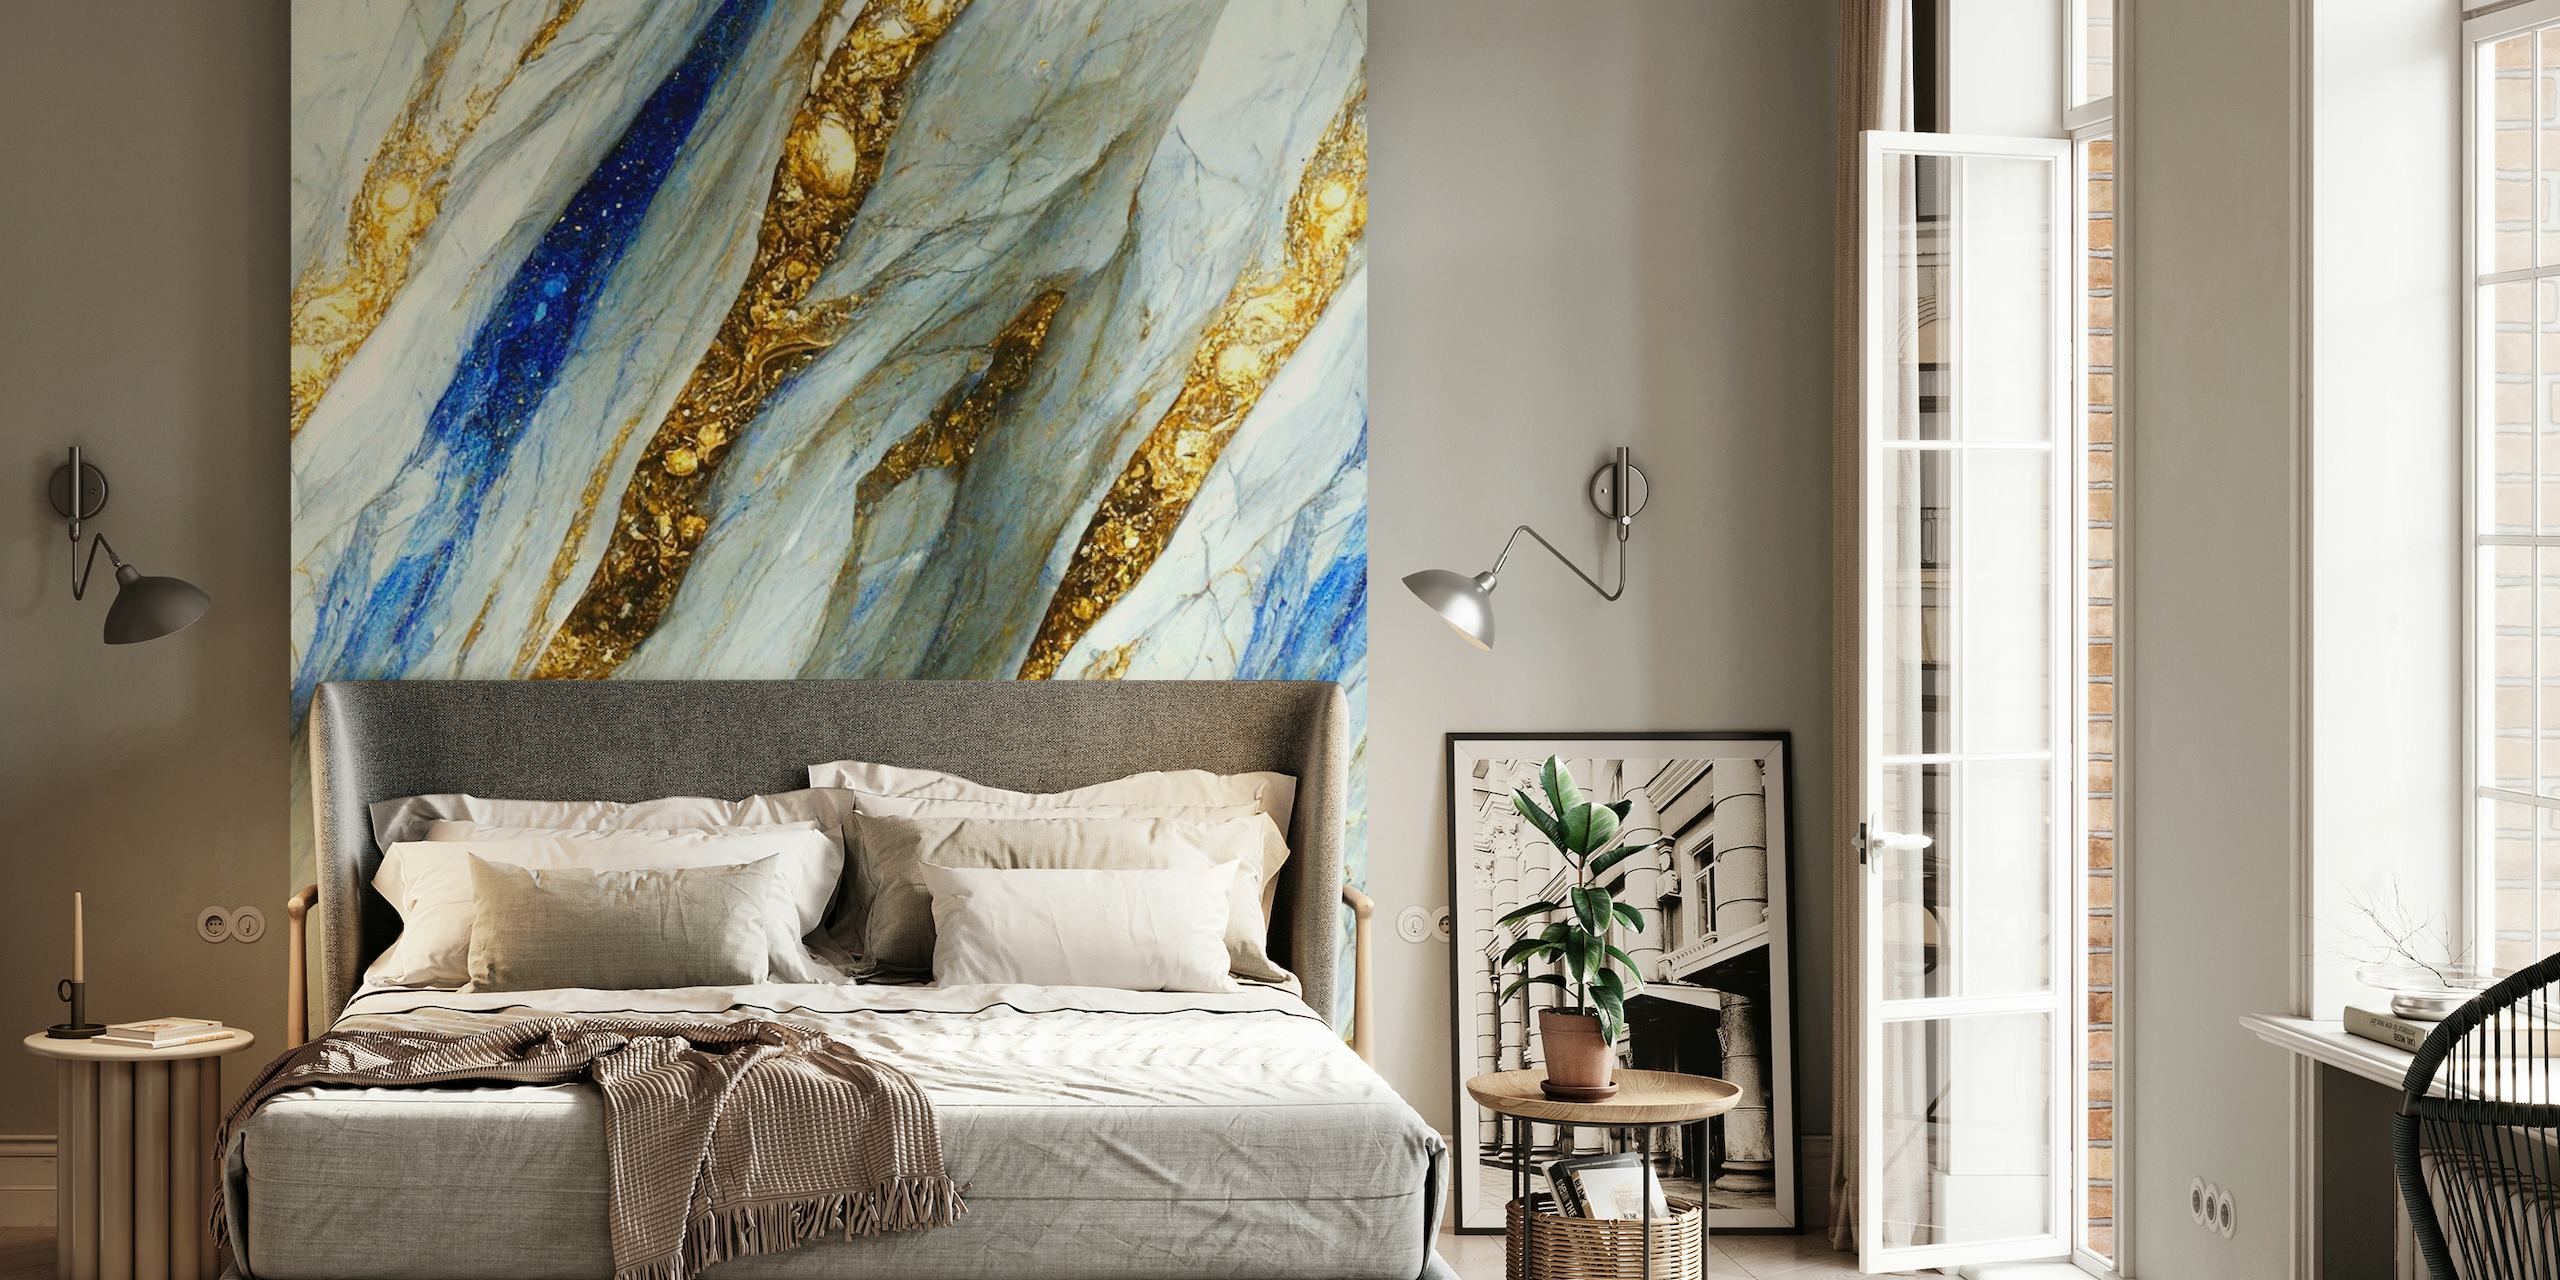 Elegant wall mural with gold, blue and white marble patterns resembling flowing rivers of liquid gold and gemstones.